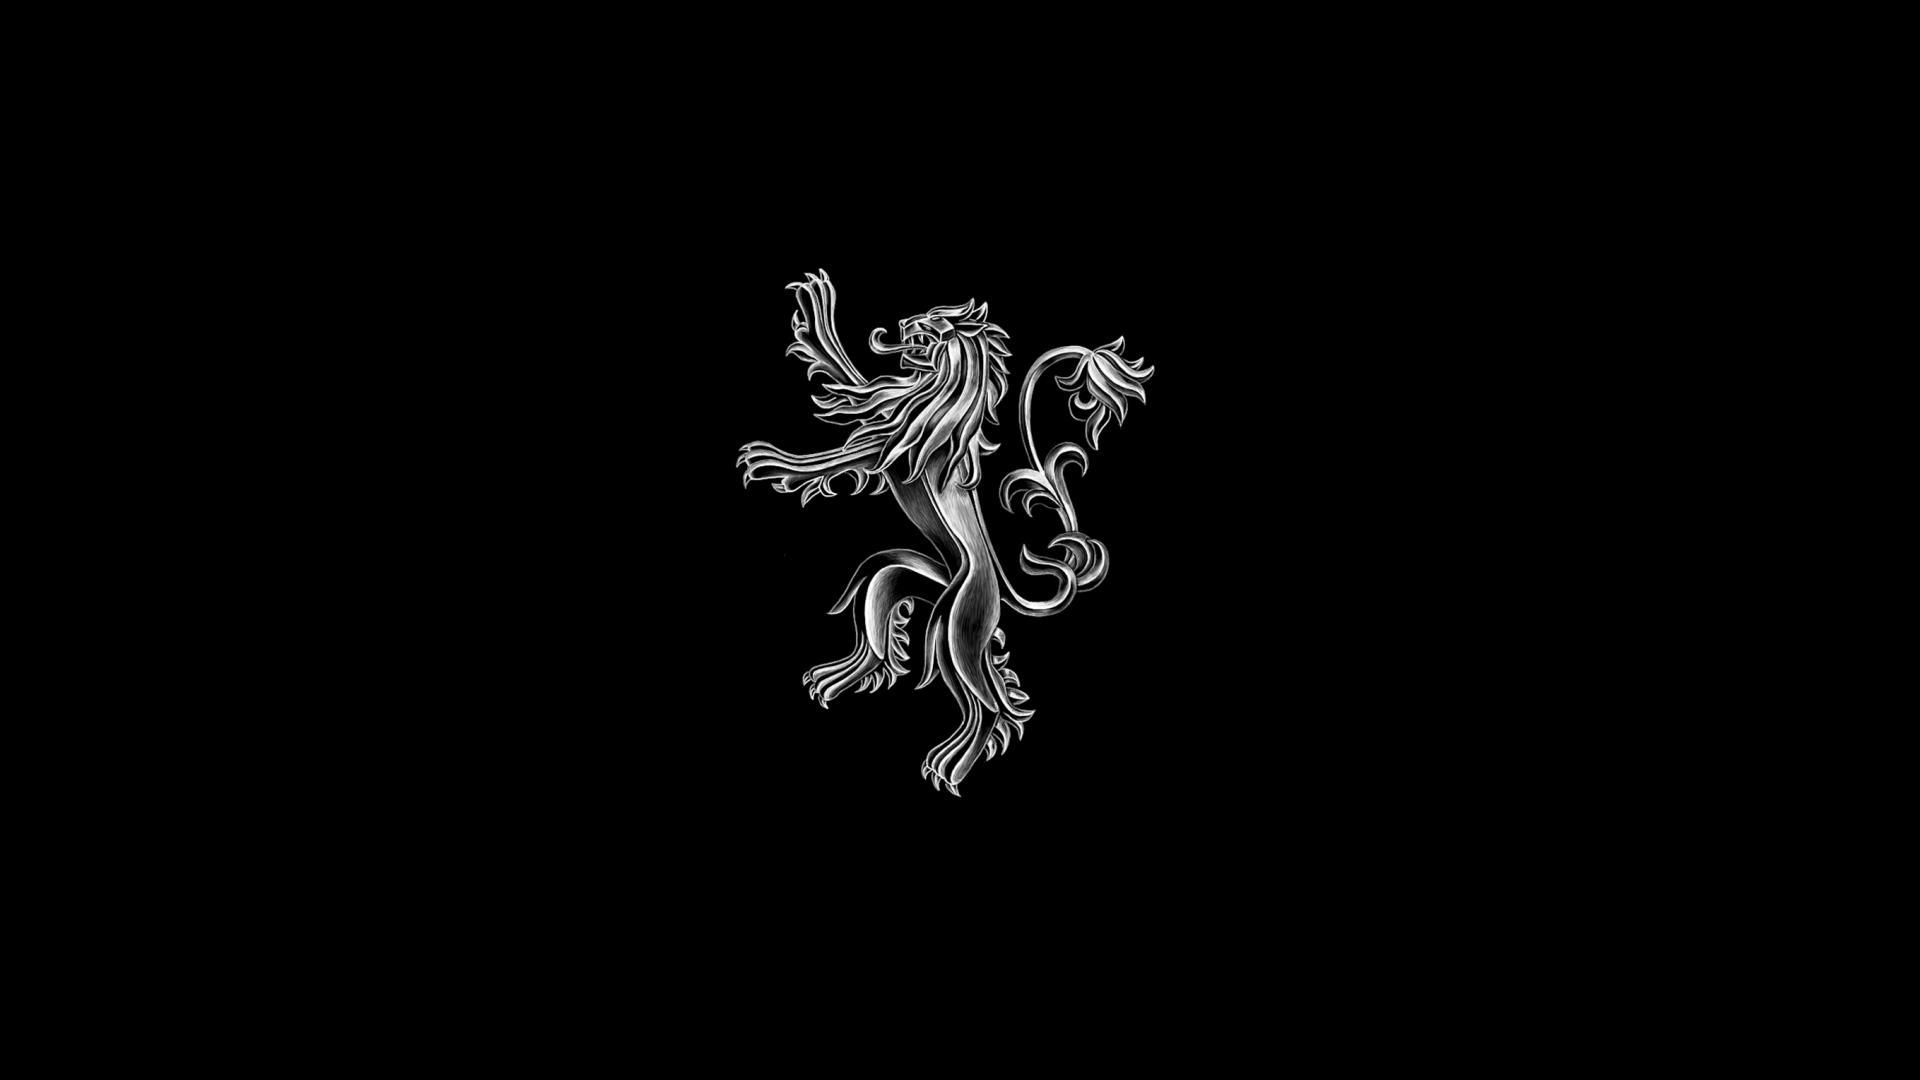 General 1920x1080 Game of Thrones sigils lion House Lannister TV series simple background black background